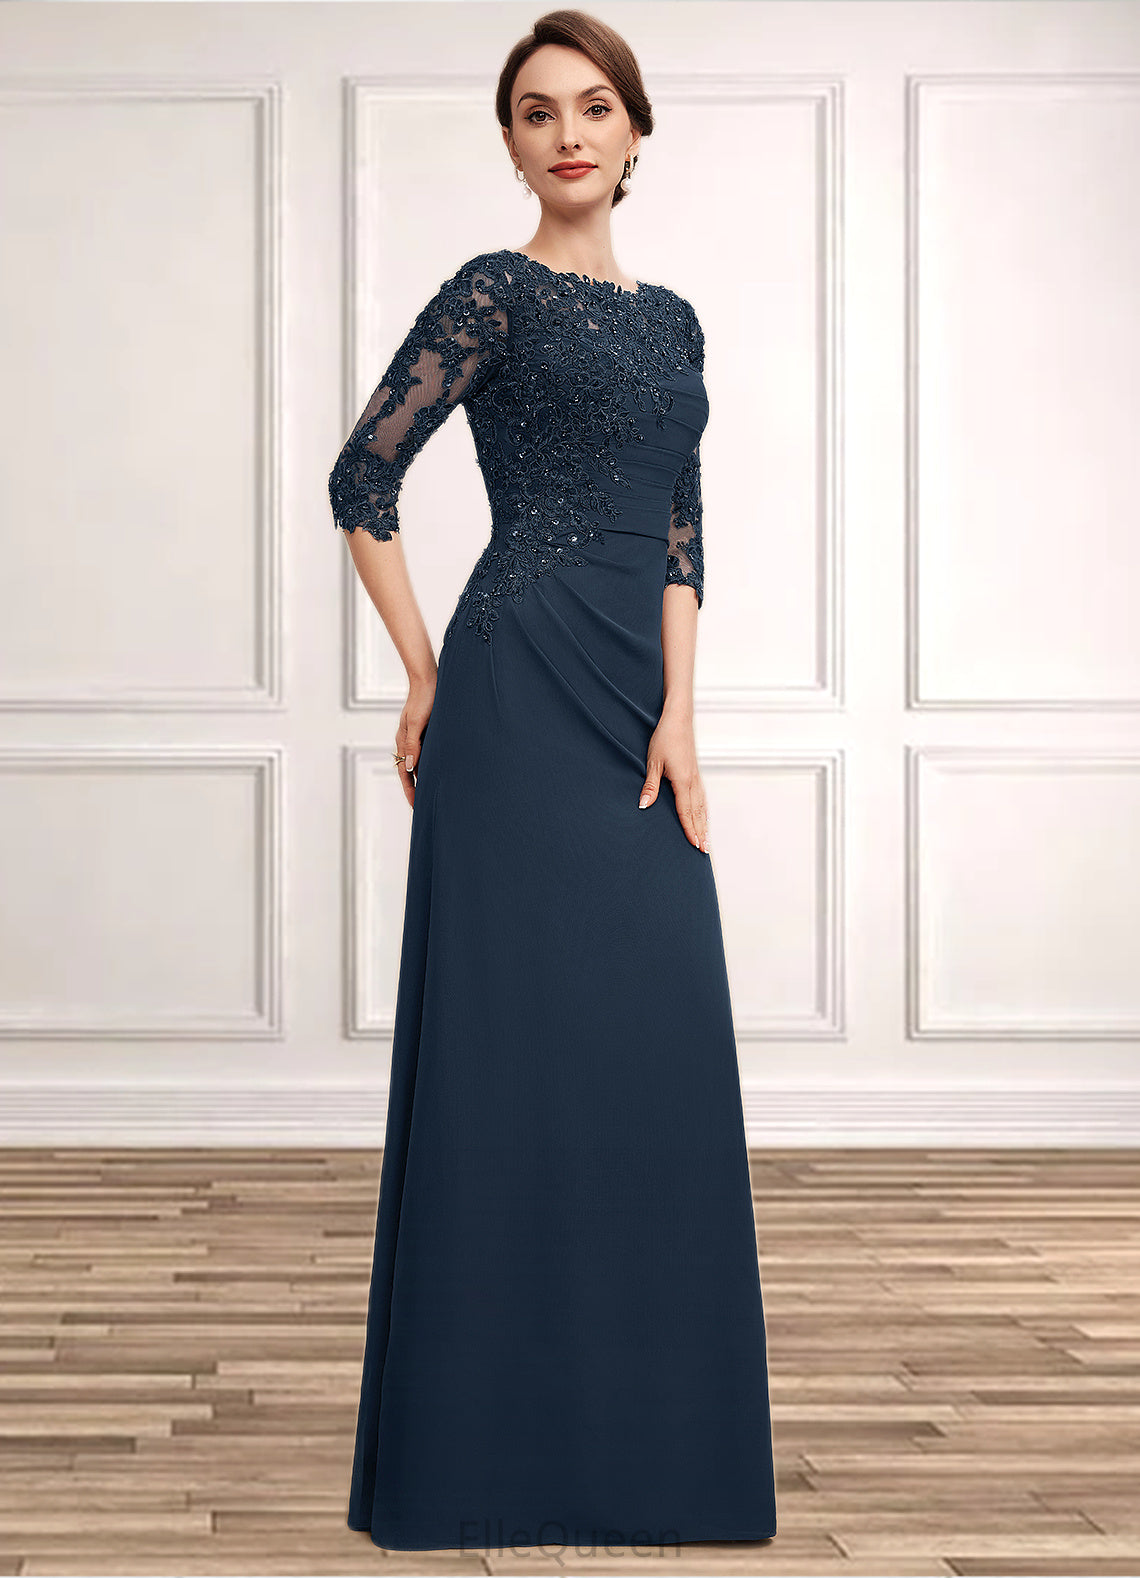 Allison A-Line Scoop Neck Floor-Length Chiffon Lace Mother of the Bride Dress With Ruffle Beading Sequins DG126P0014536